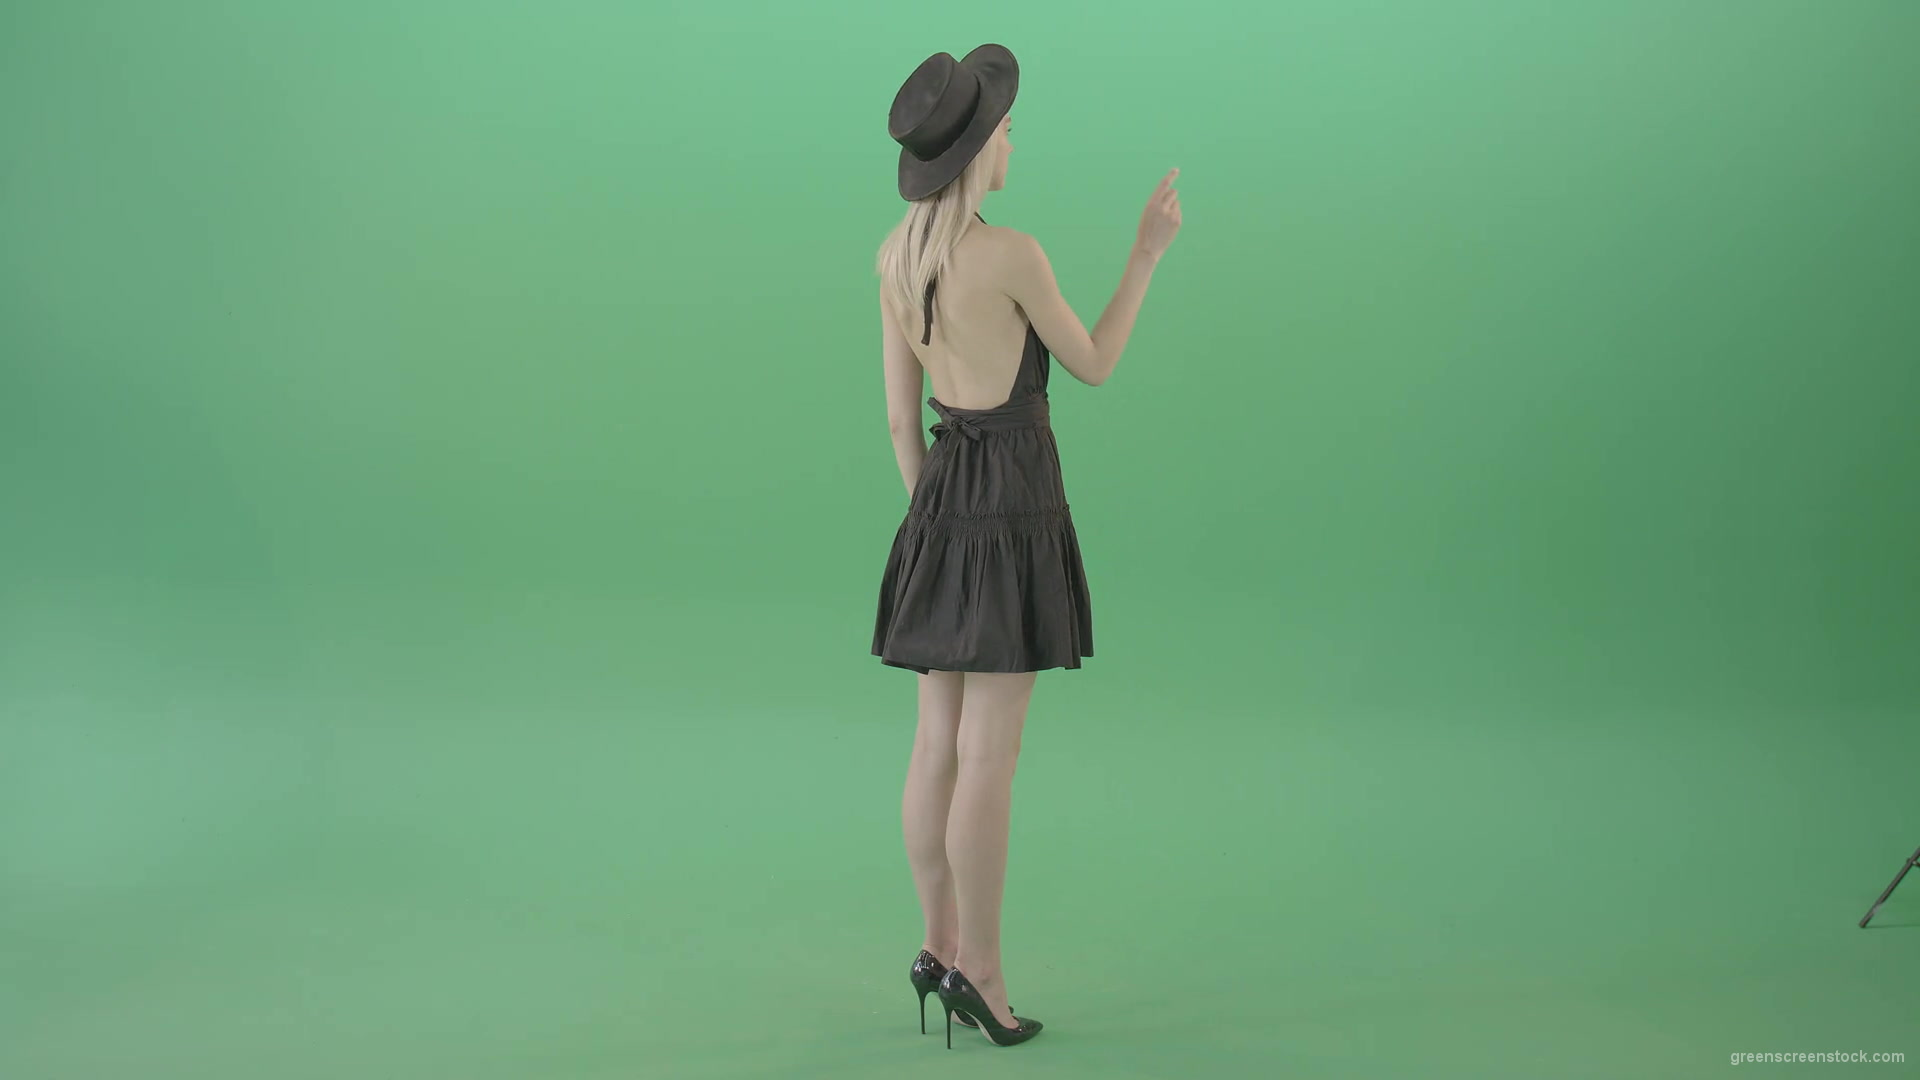 Full-size-fashion-girl-looking-virtual-products-on-touch-green-screen-4K-Video-Footage-1920_002 Green Screen Stock